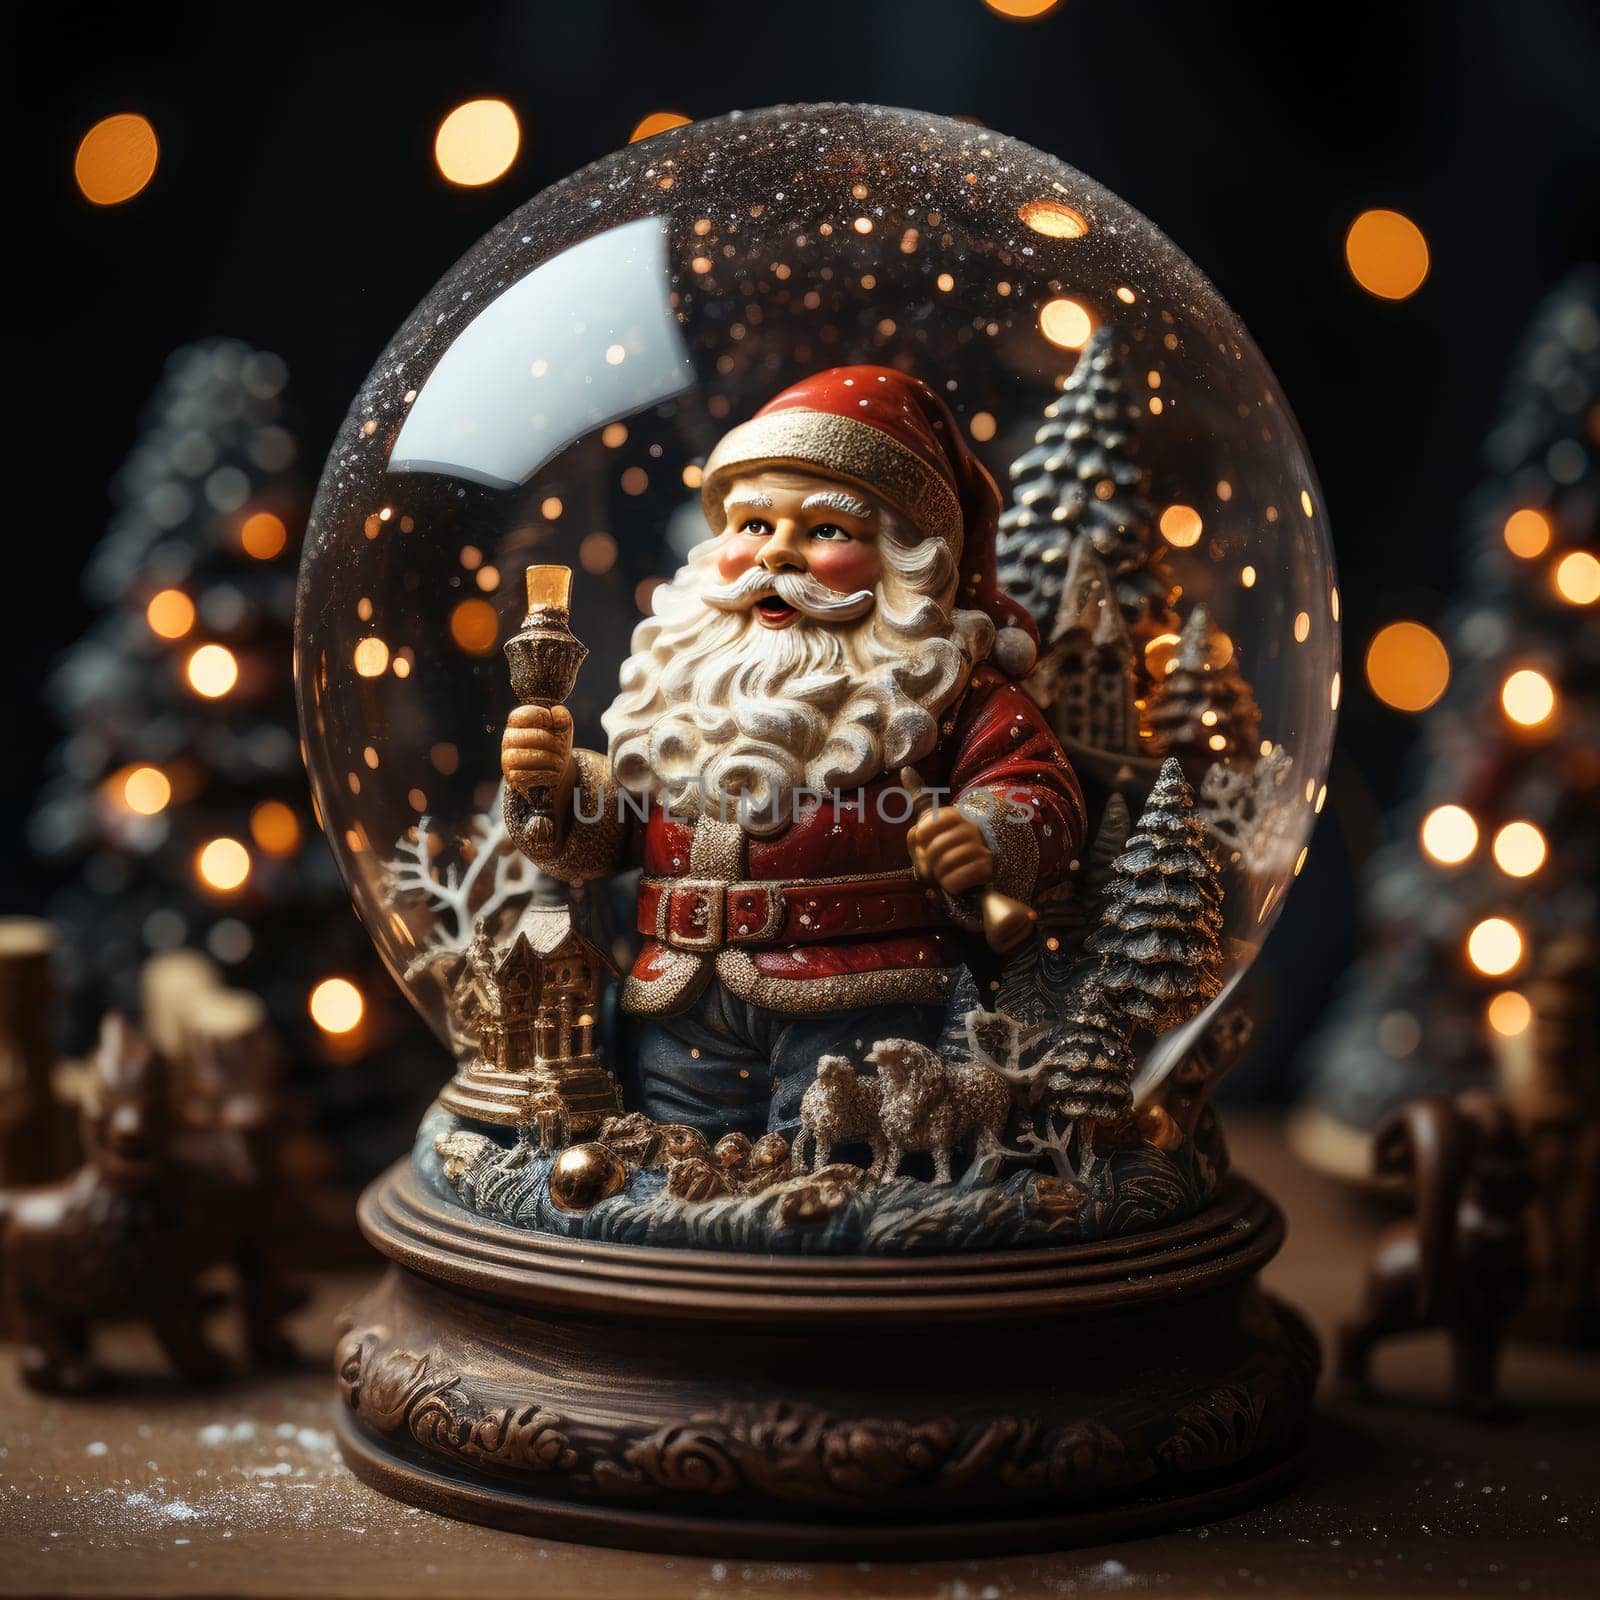 A beautifully crafted Santa Claus snow globe encased in a glass globe makes it the perfect addition to holiday Christmas décor and adds a festive mood to any setting..